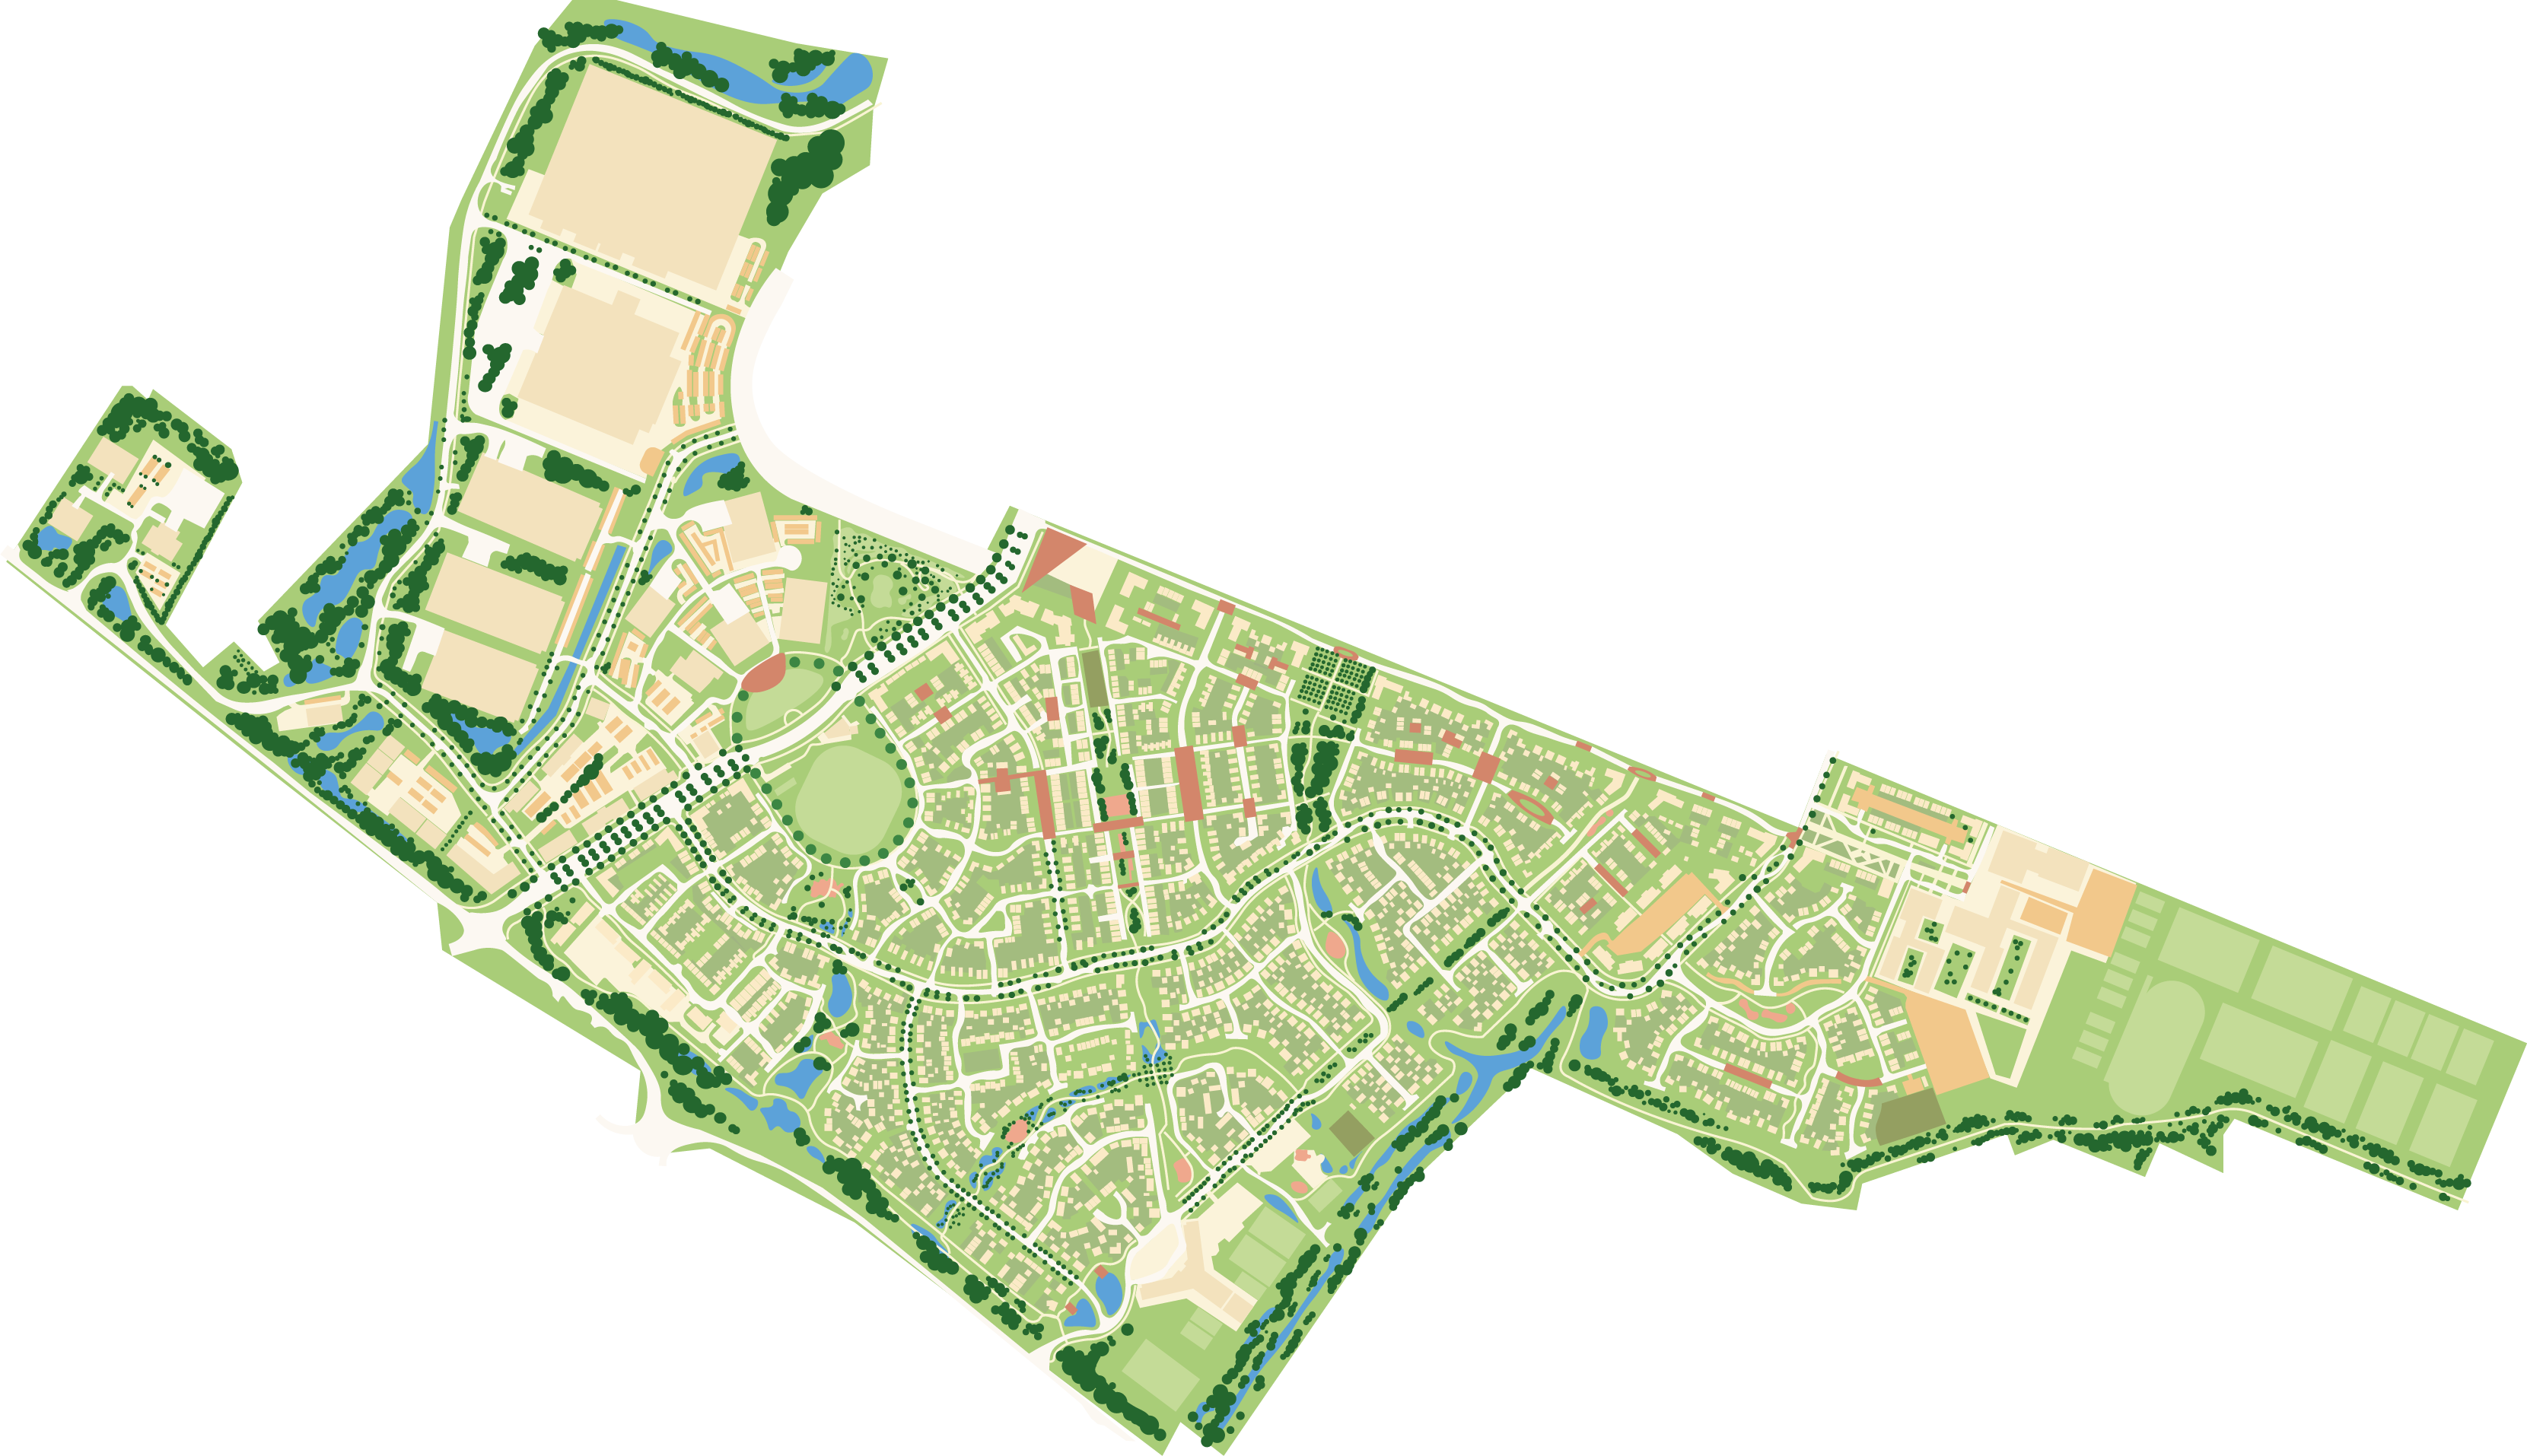 KP1_Approval_-_Masterplan_from_Alconbury_-_800_x_500.png